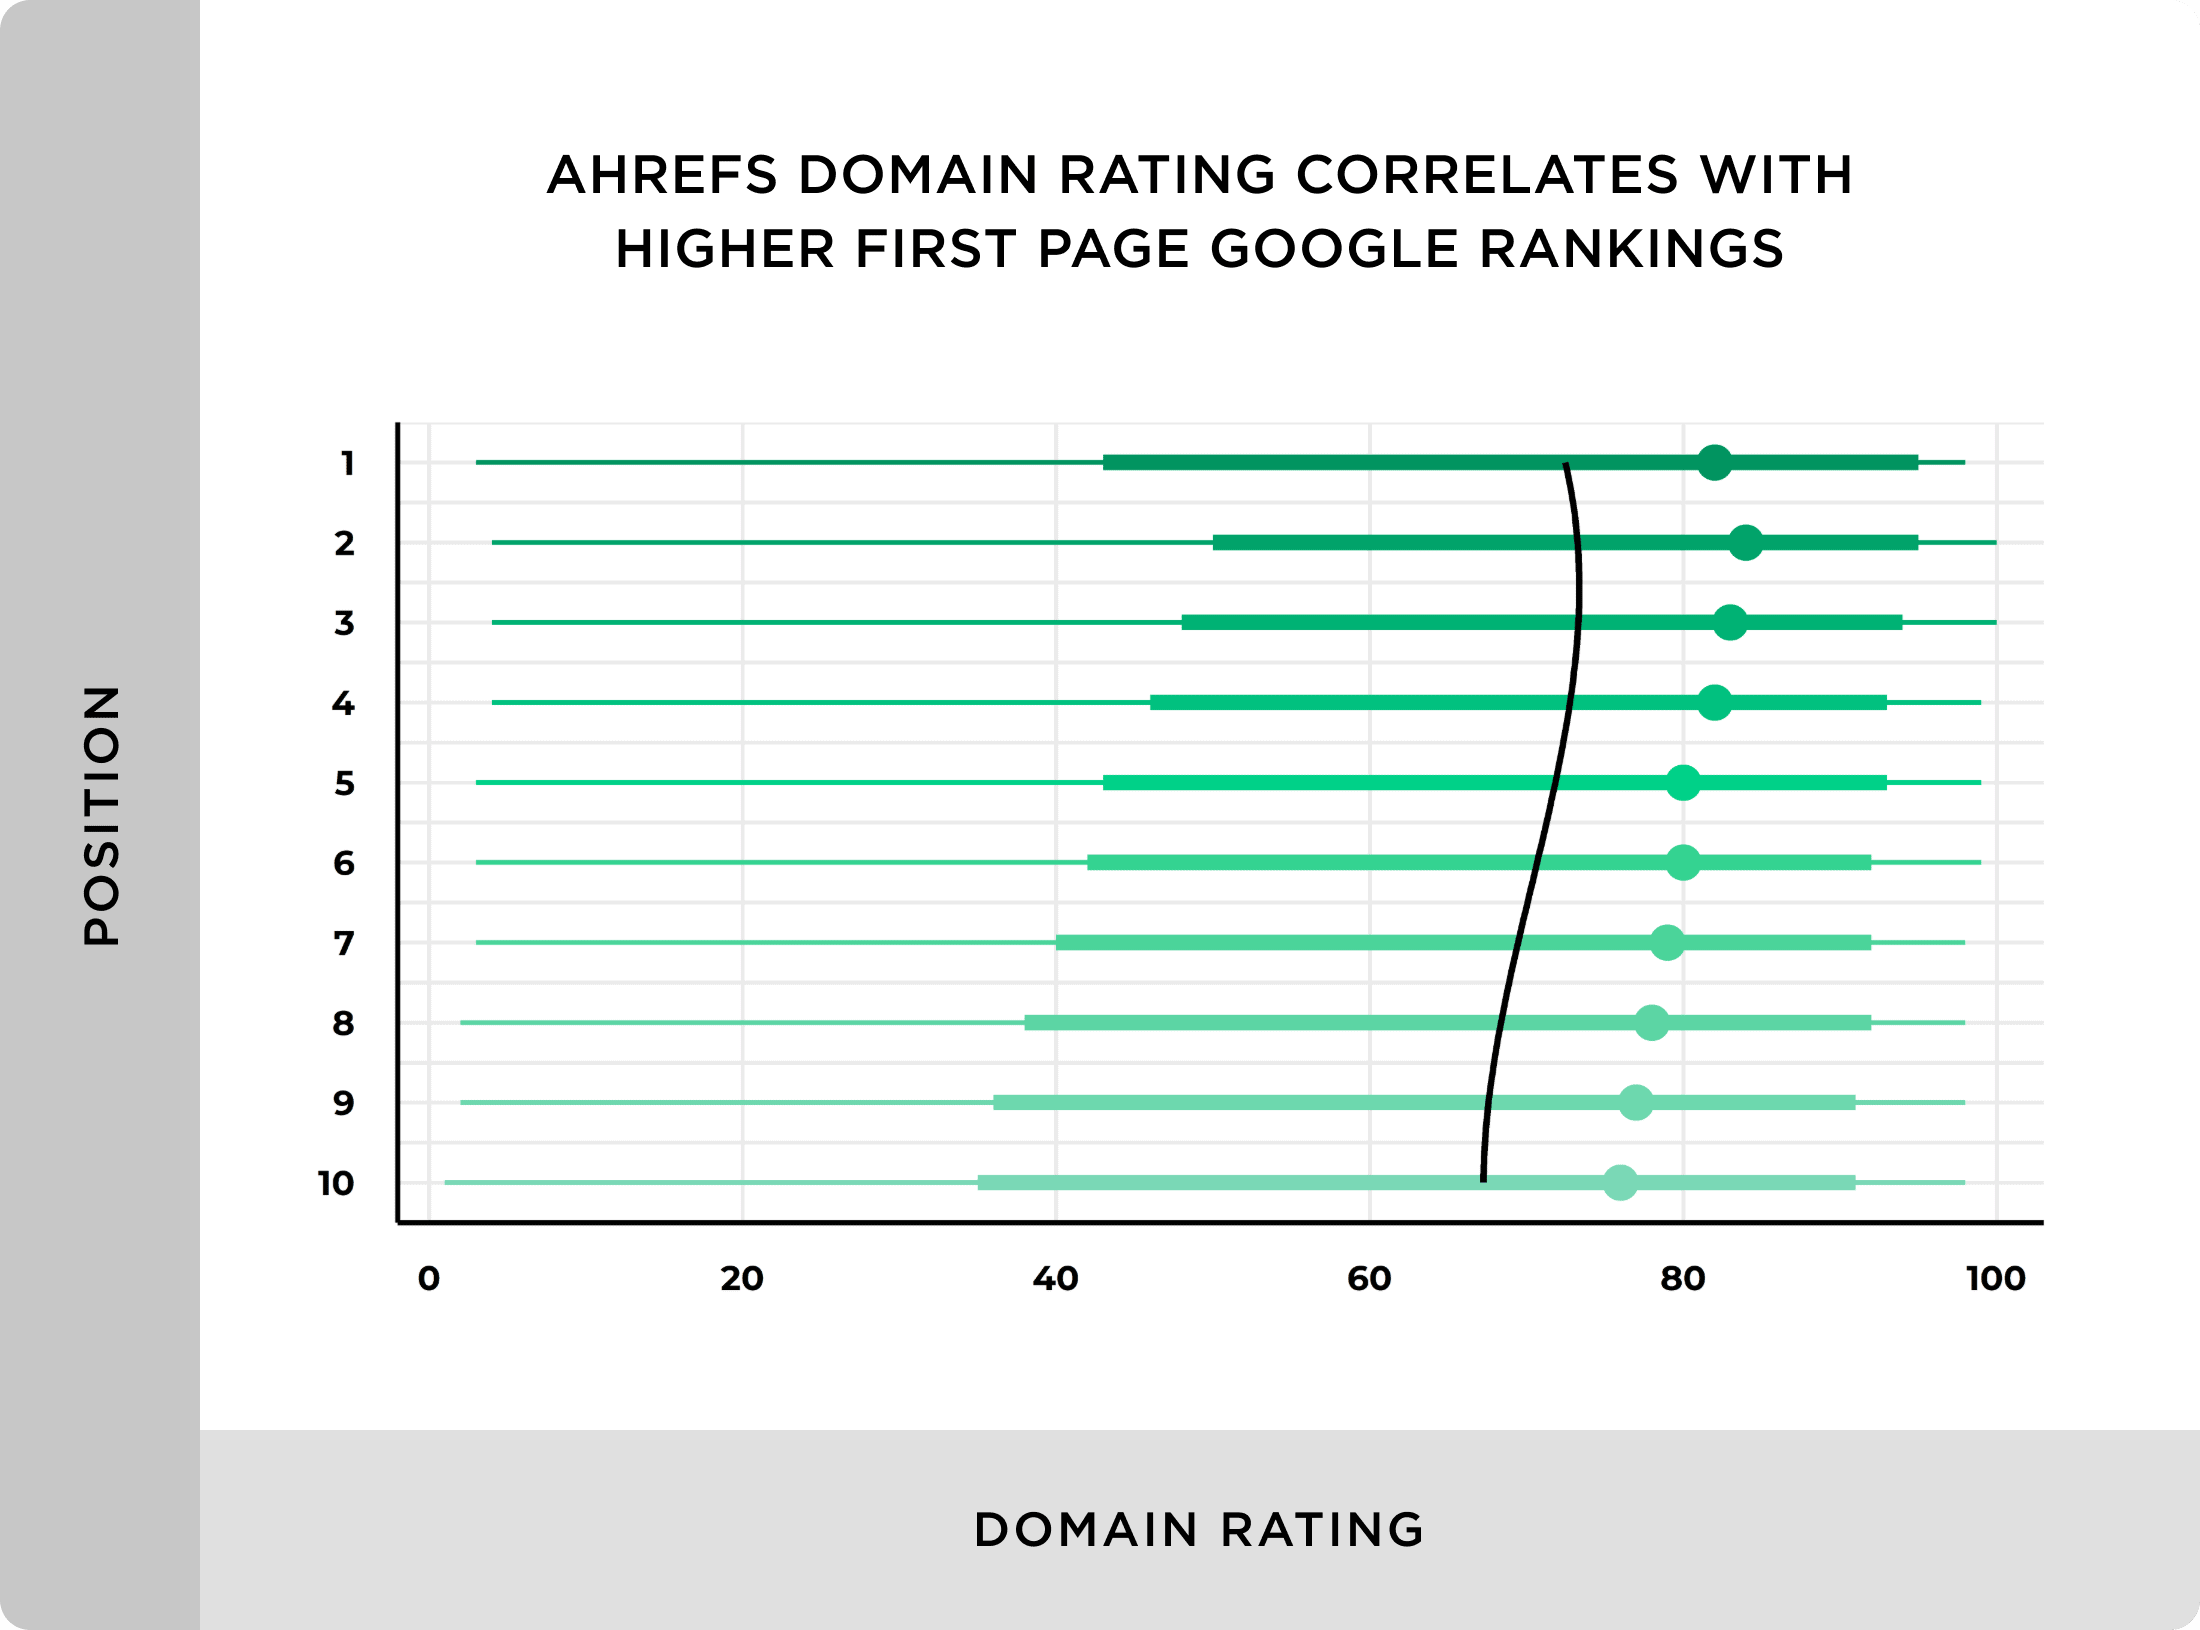 Ahrefs domain rating correlates with higher first page Google rankings